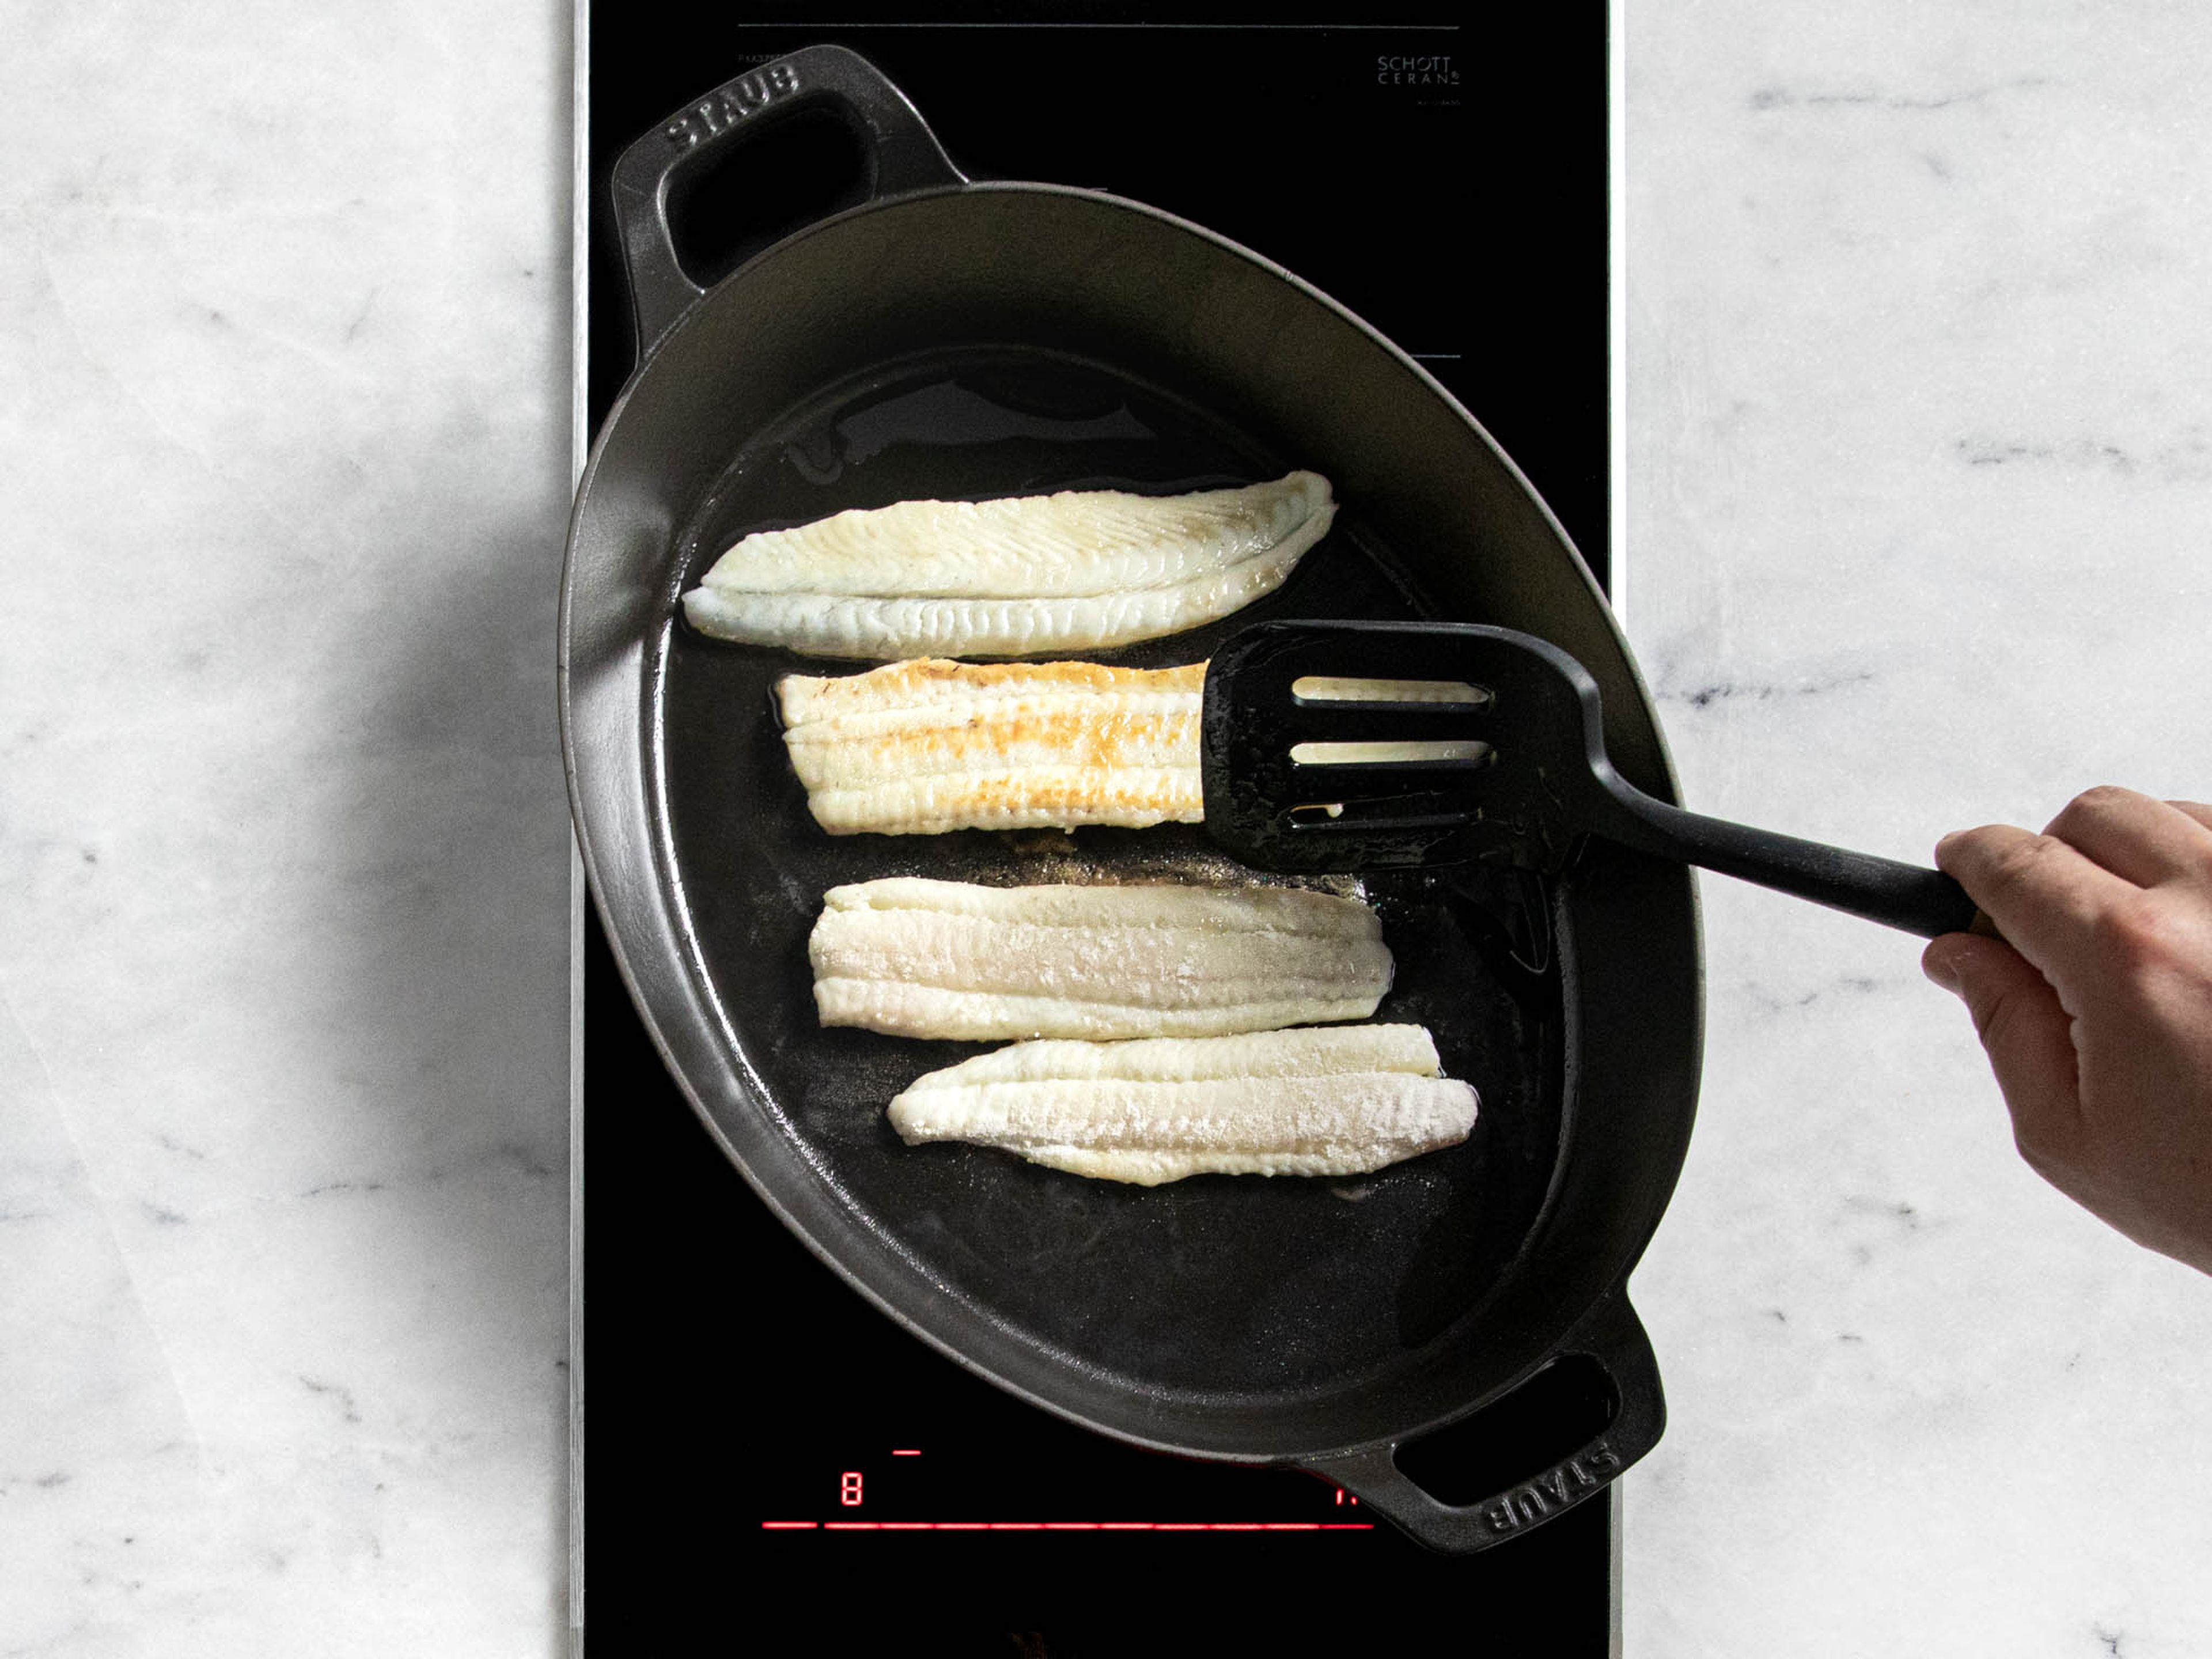 Heat vegetable oil in a frying pan over medium-high heat. Fry sole for approx. 2 min. on each side, then transfer to a plate.